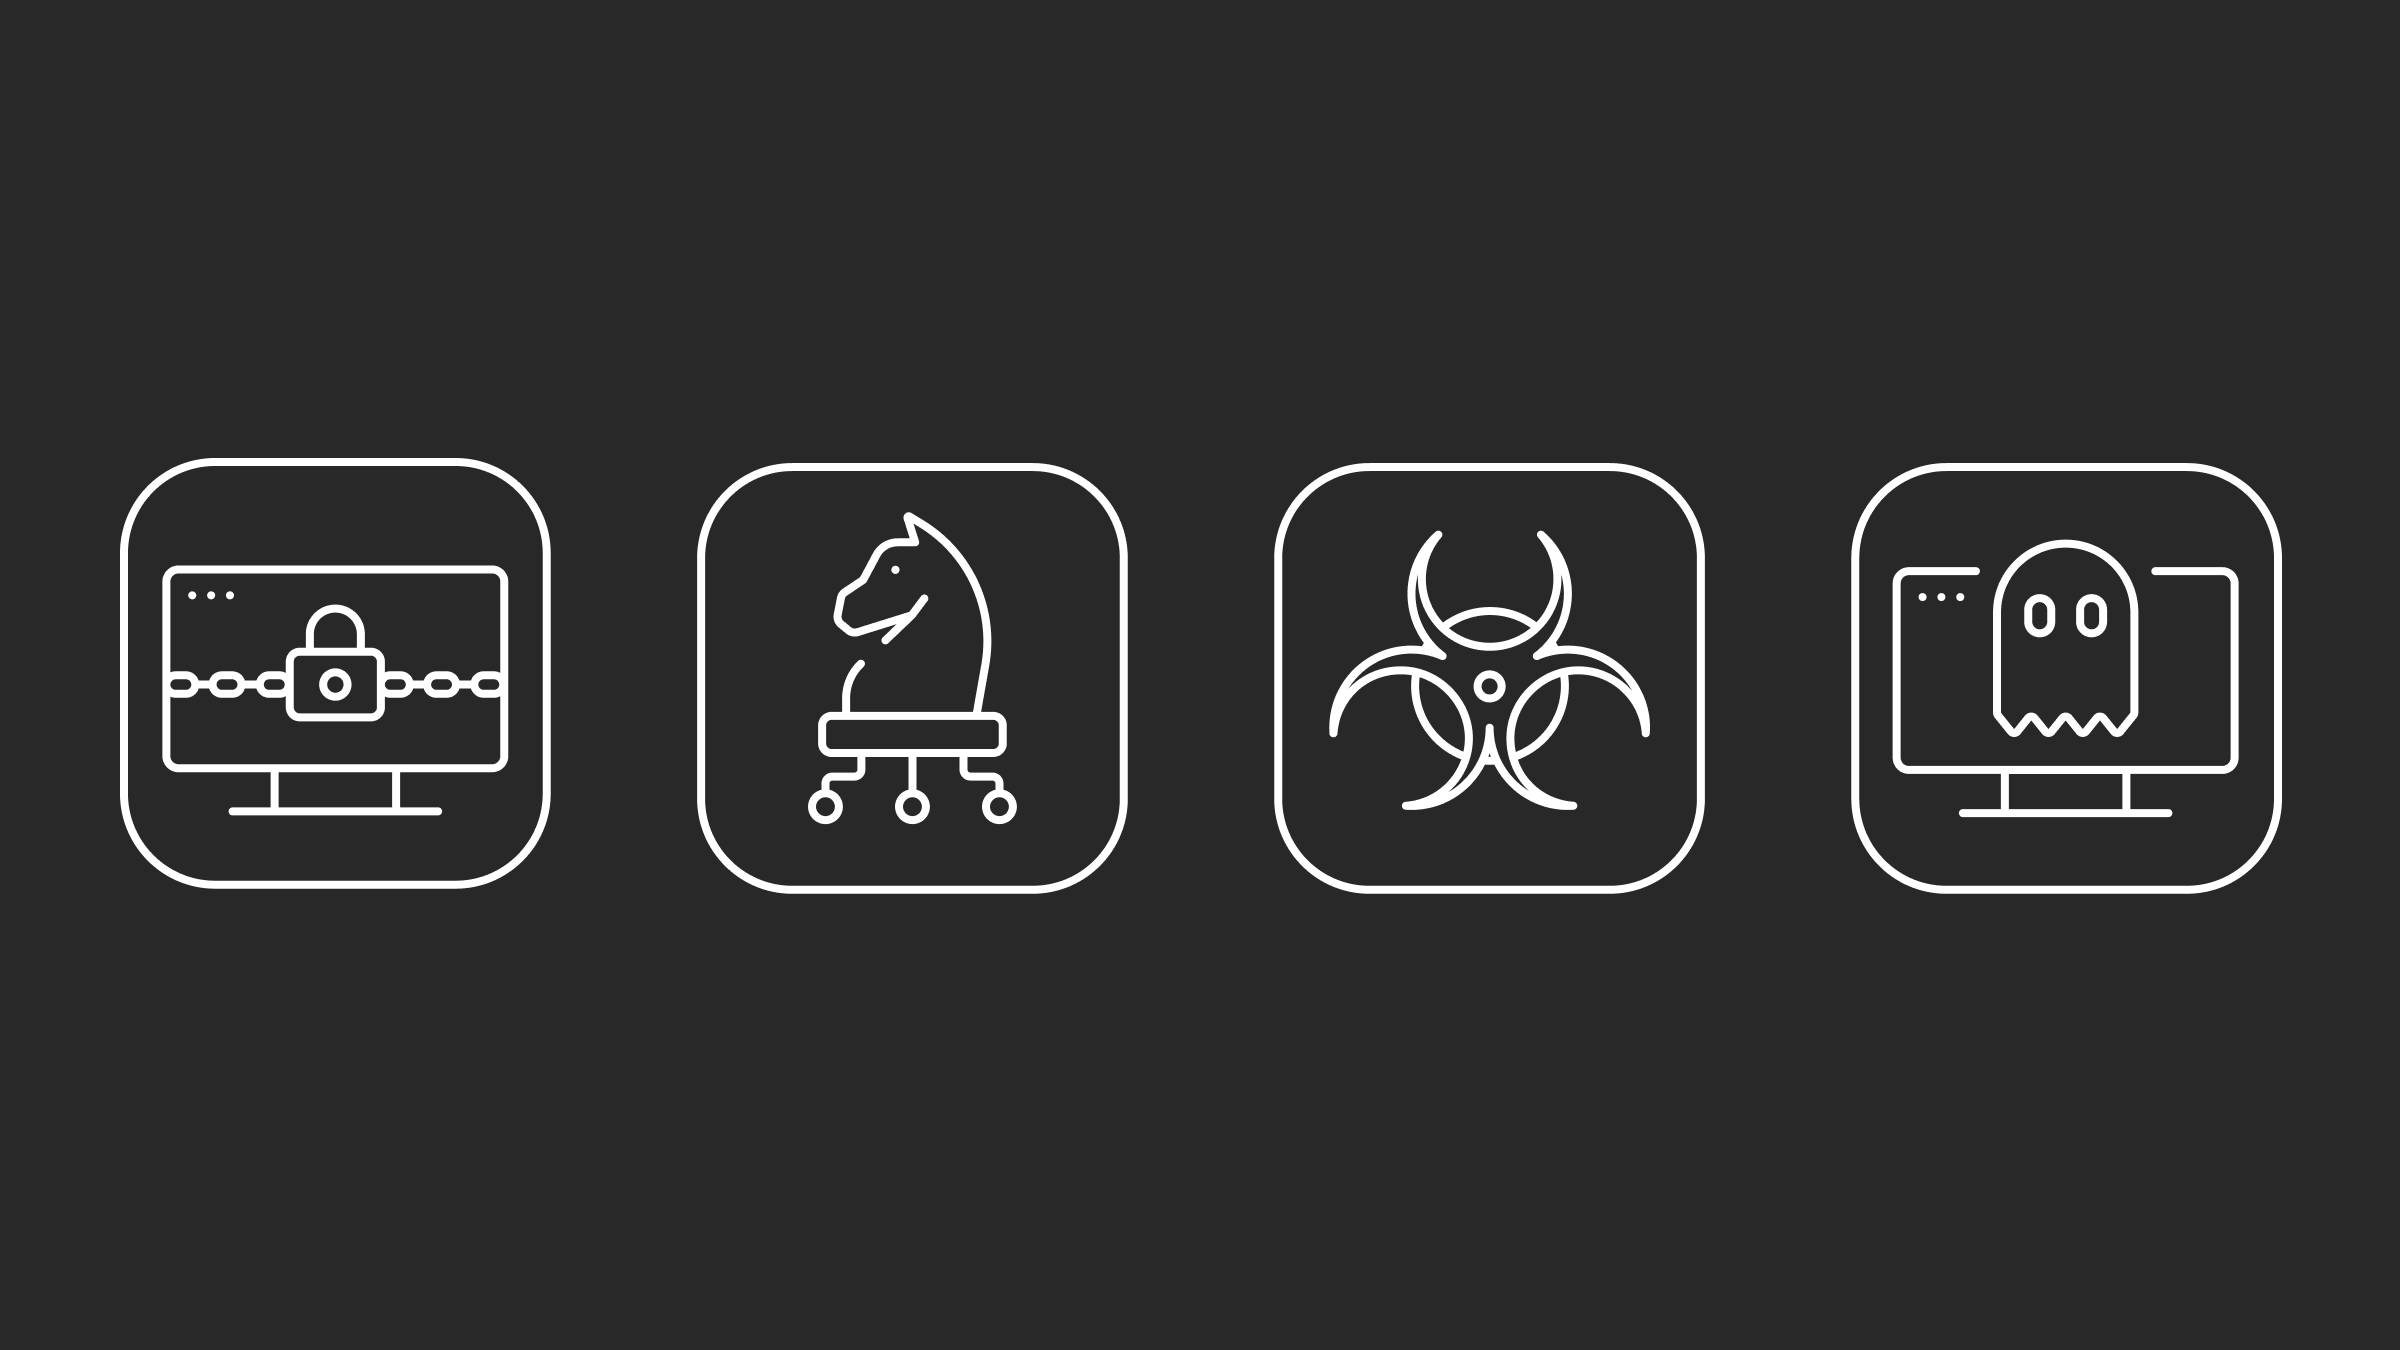 An infographic with icons showing ransomware, trojans, virus and worms, and rootkits.